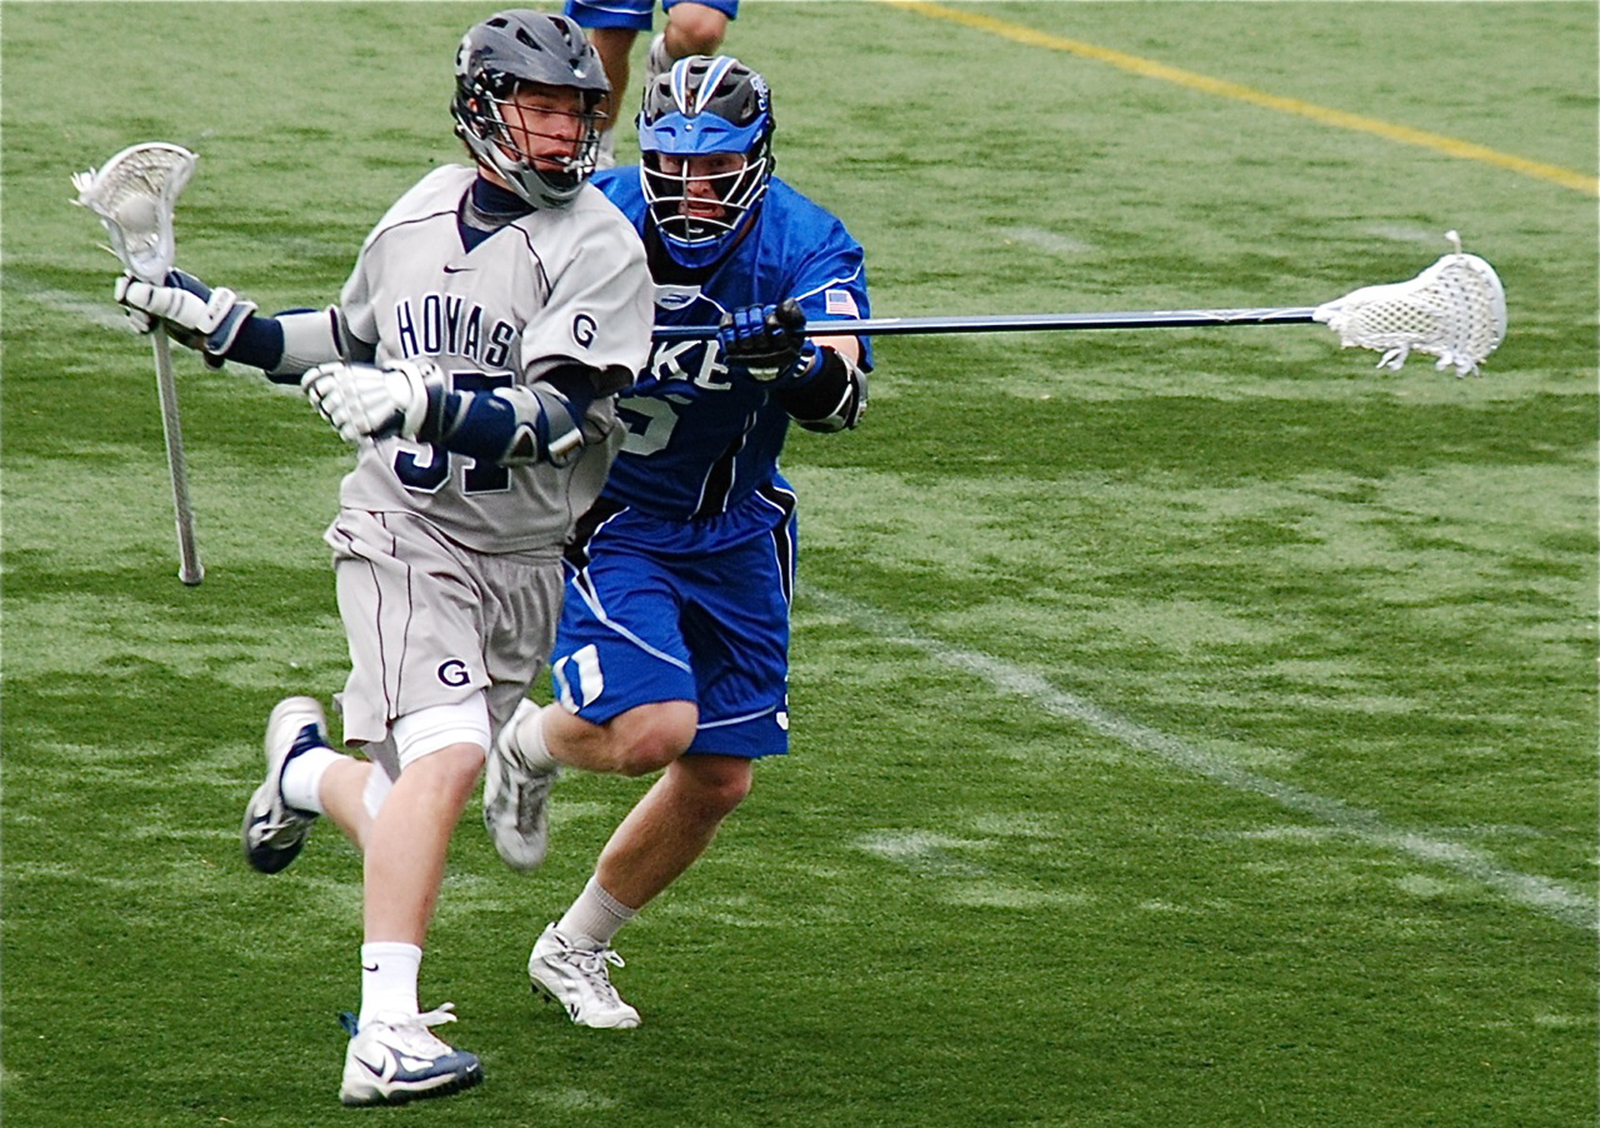 The duke lacrosse player still outrunning his past